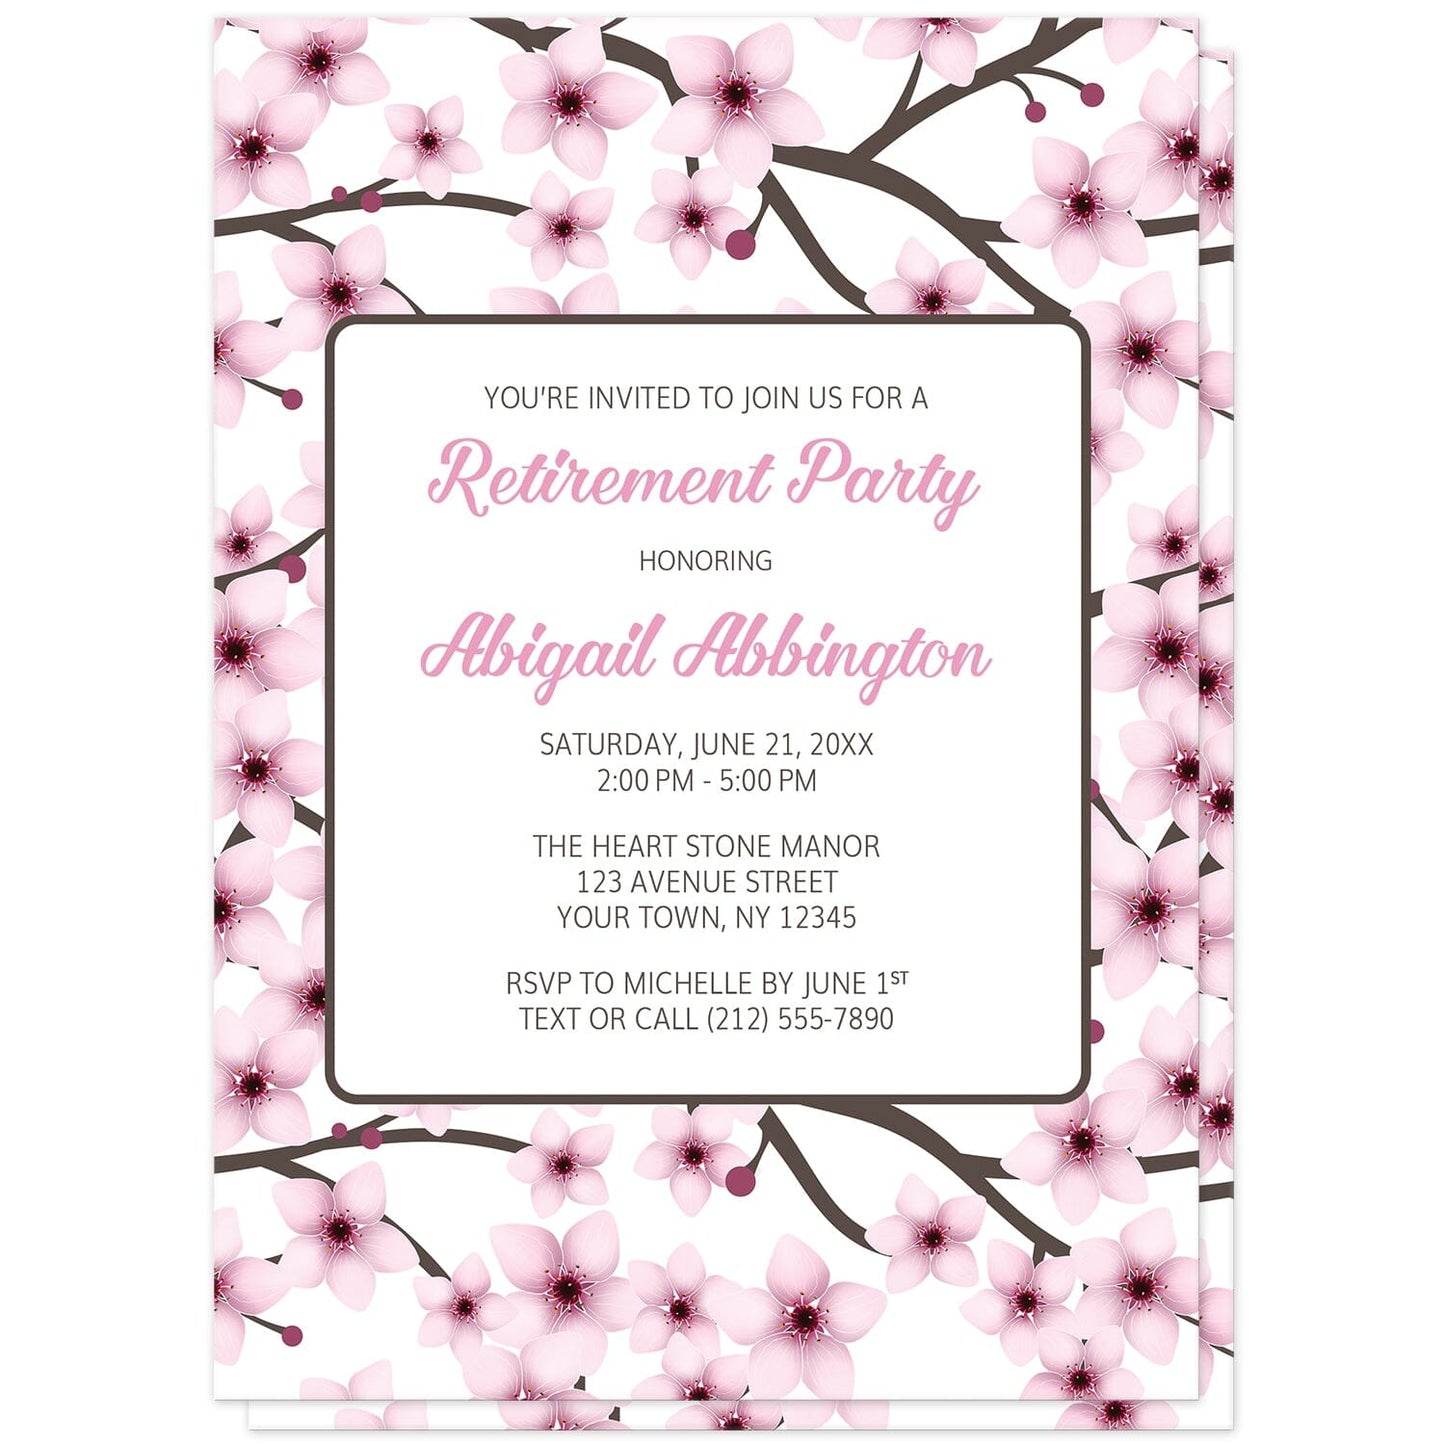 Cherry Blossom Retirement Party Invitations (front) at Artistically Invited. Beautiful cherry blossom retirement party invitations designed with a gorgeous floral pattern of pink cherry blossom branches on both sides of the invitations. Your personalized retirement party details are custom printed in pink and brown on white in the center area over the cherry blossoms pattern on the front. 